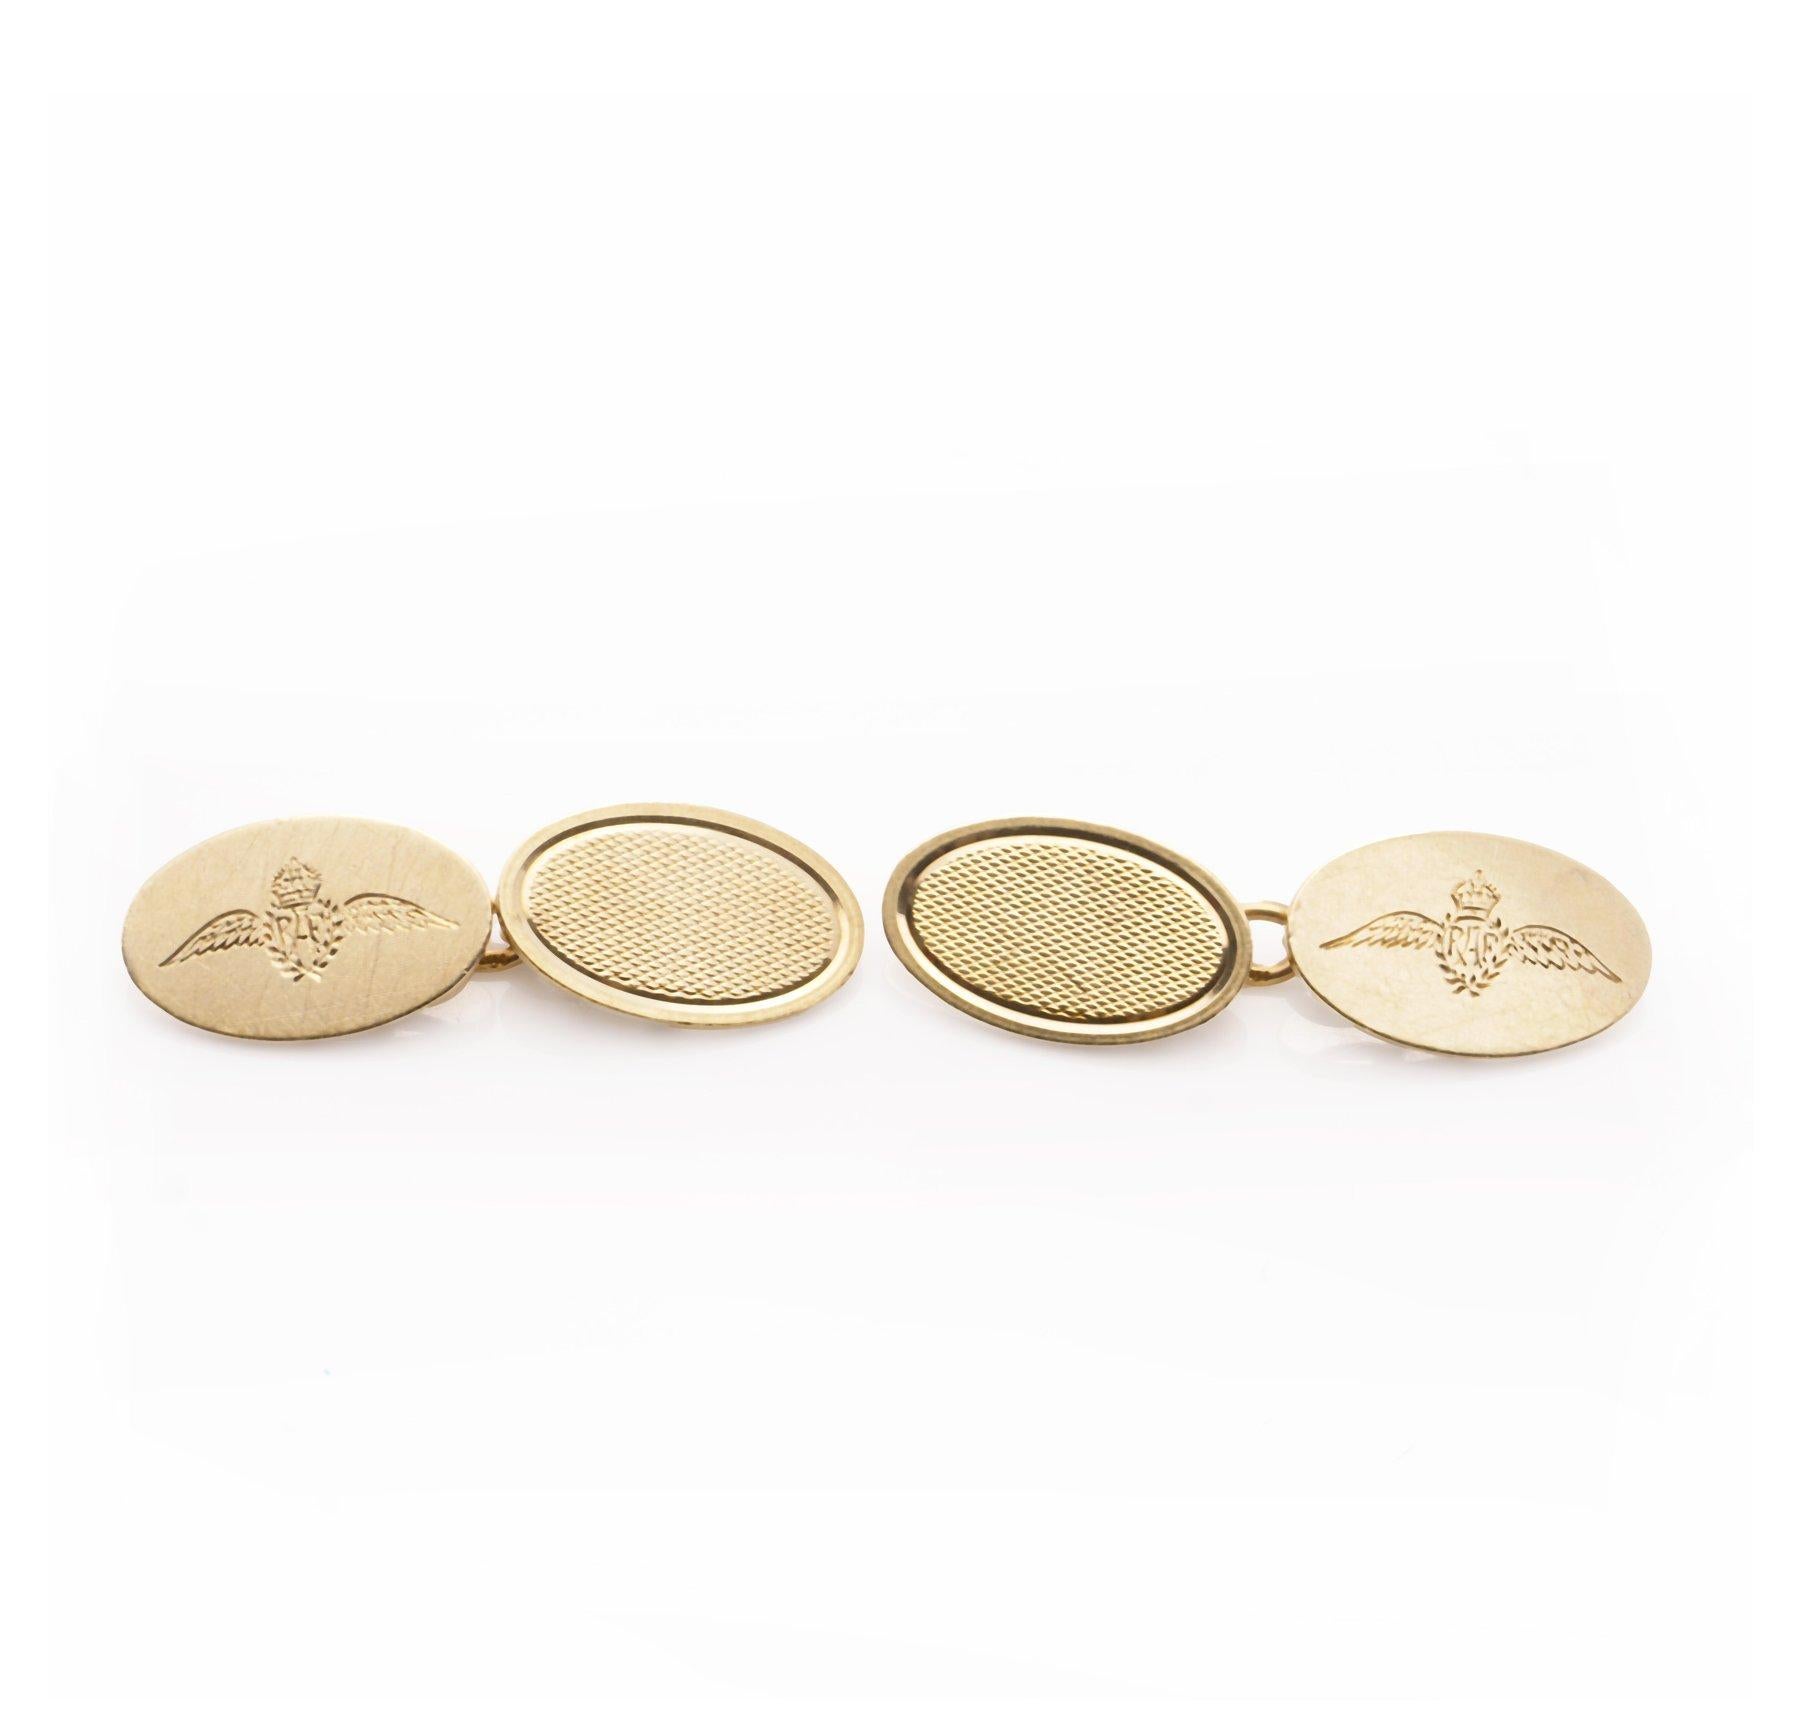 You can elevate your style with our exquisite Henry Griffith & Son cufflinks, which are fashioned from 9kt yellow gold.
The cufflinks feature spread wings, initials letters, and a crown atop. Symbolizing freedom, aspiration, and protection, the